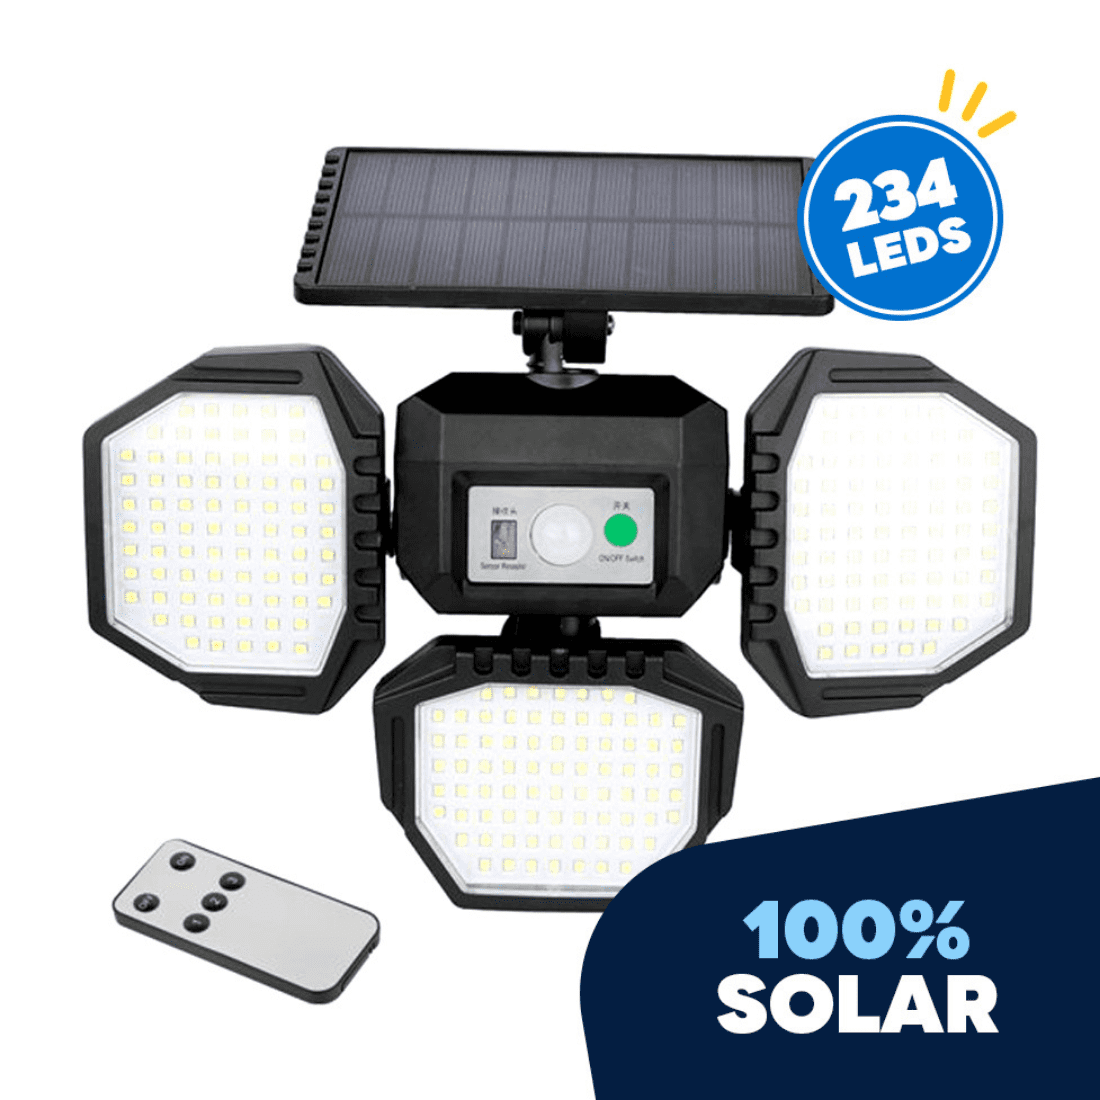 Waterproof Solar Wall Lights Wilko With Motion Sensor And 4 Modes For  Outdoor Garden Lighting 244/222 LED, Solar Powered Focos Solares From Leeu,  $5.28